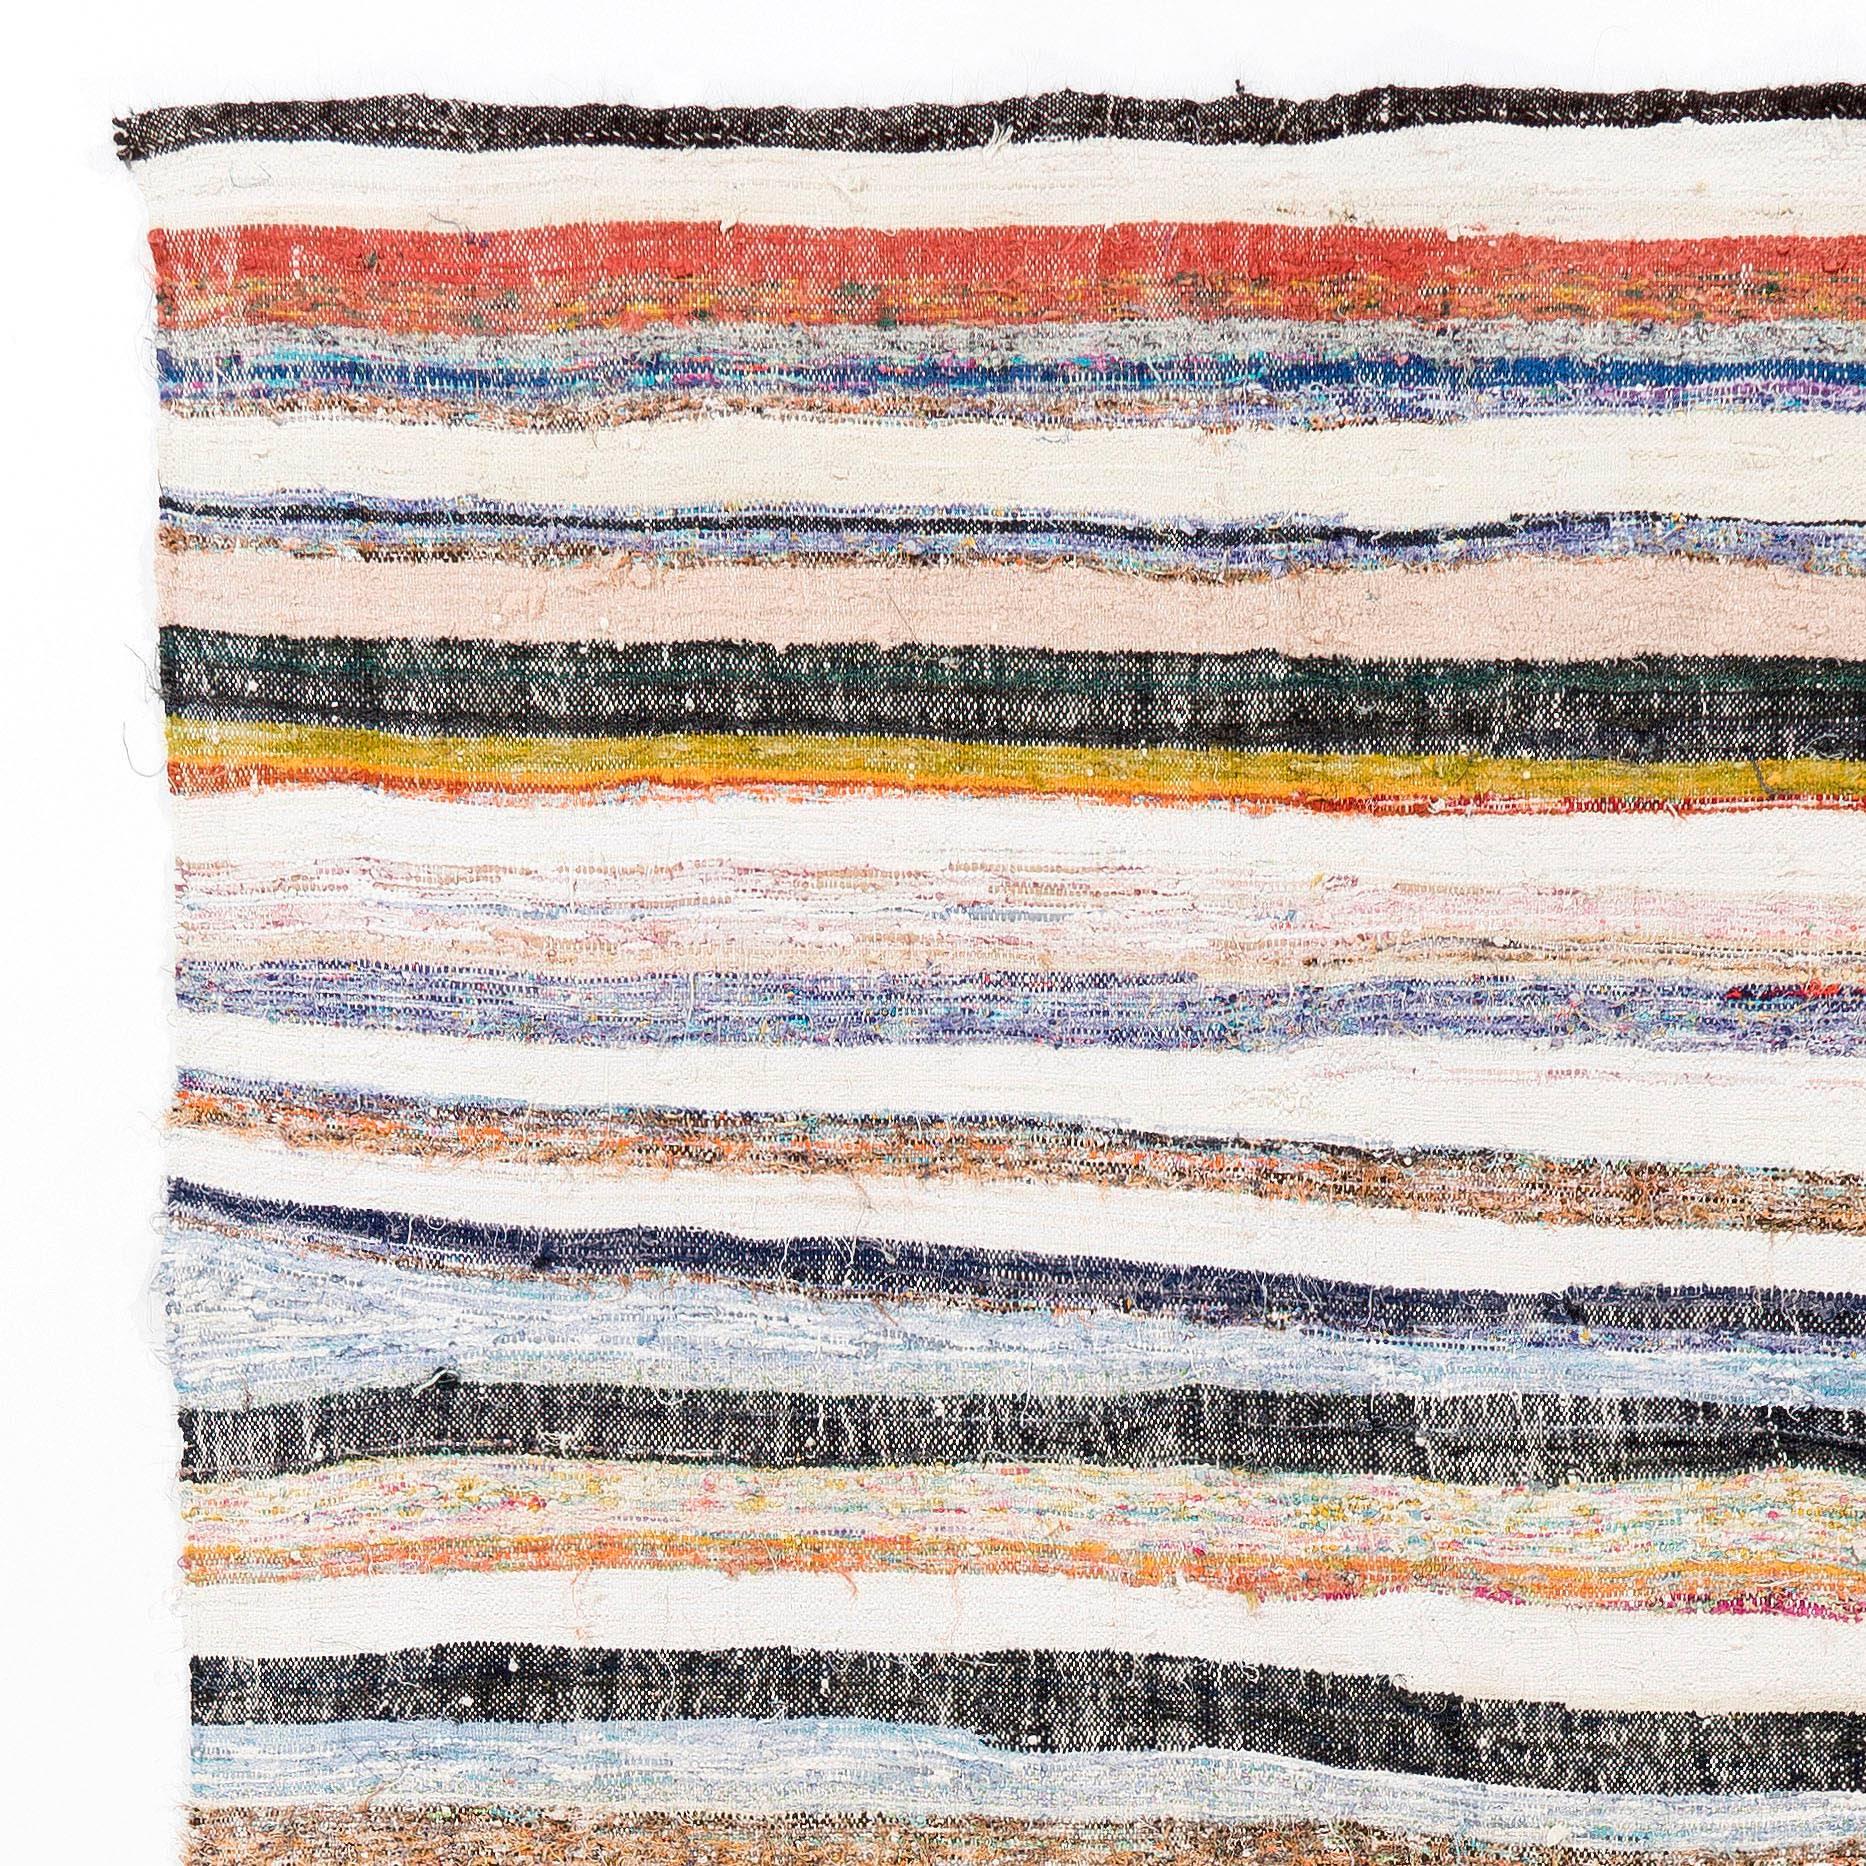 An authentic flat-weave (Kilim) from Eastern Turkey, handwoven by Nomads to be used as floor coverings in their tents and winter homes. This kilim features a simple design of stripes in refreshing colors of burnt orange, cream, pink, black, blue,